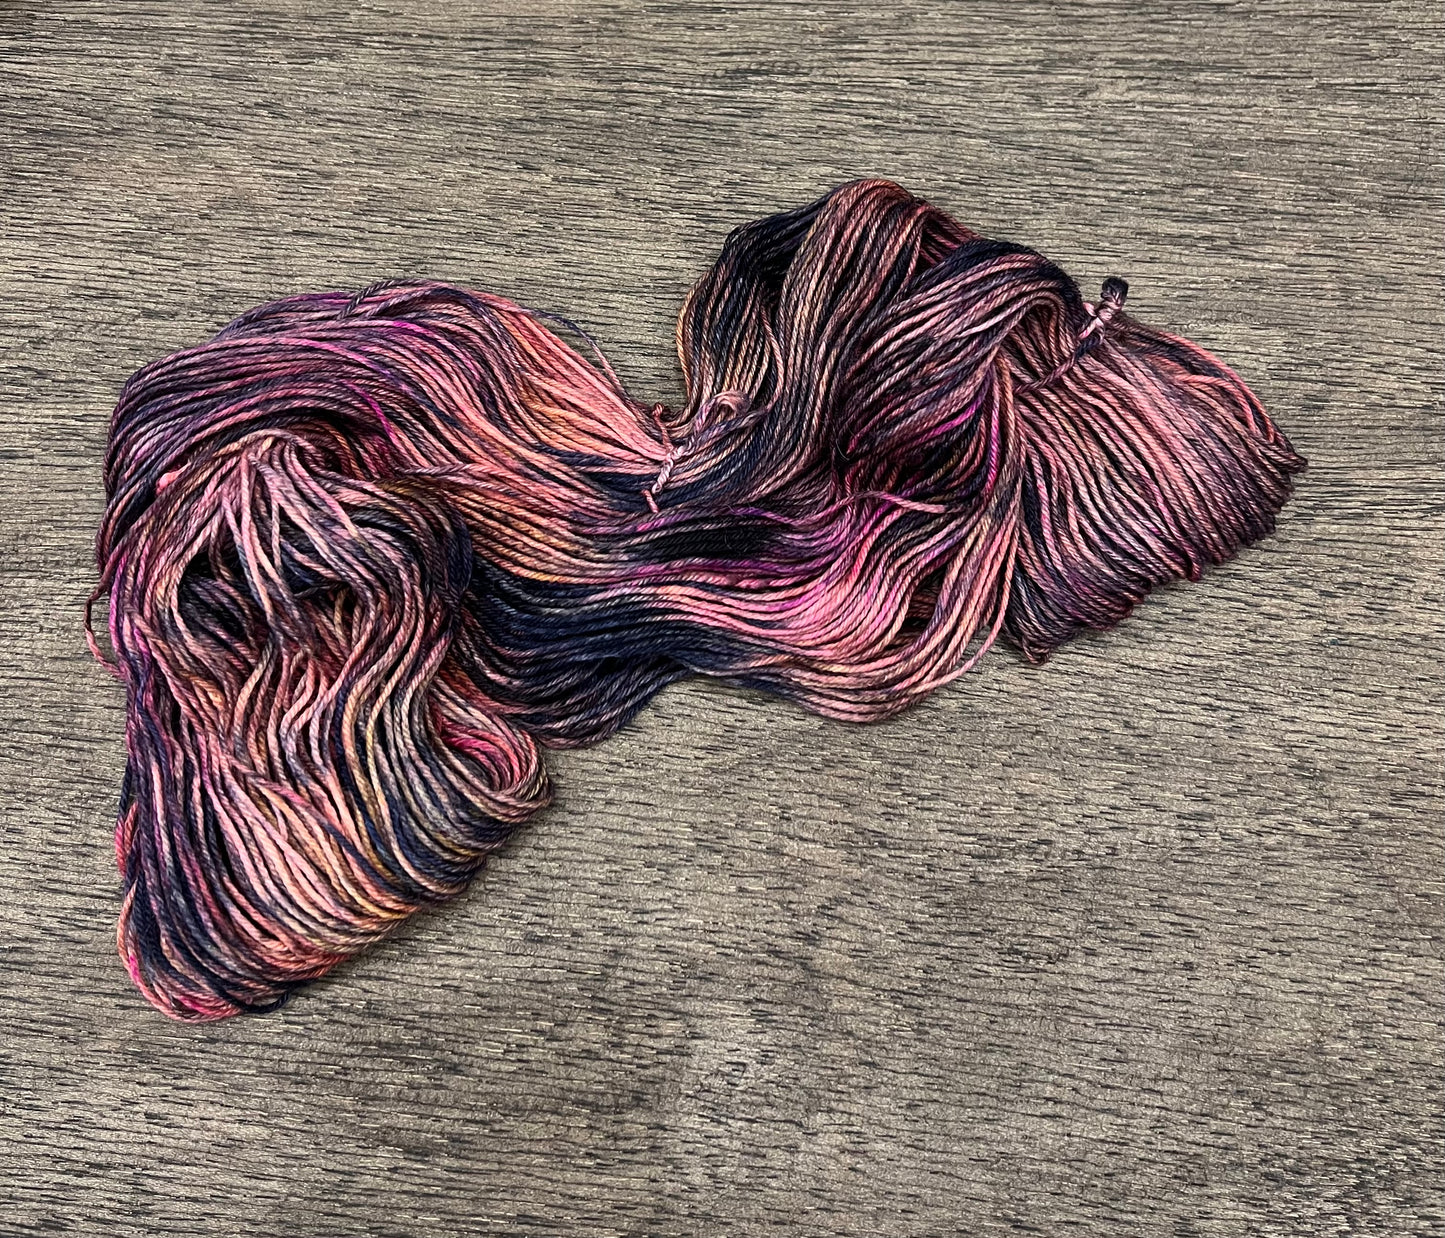 Monthly Yarn Subscriptio JUNE Mystery Skein, Yellowstone Inspired